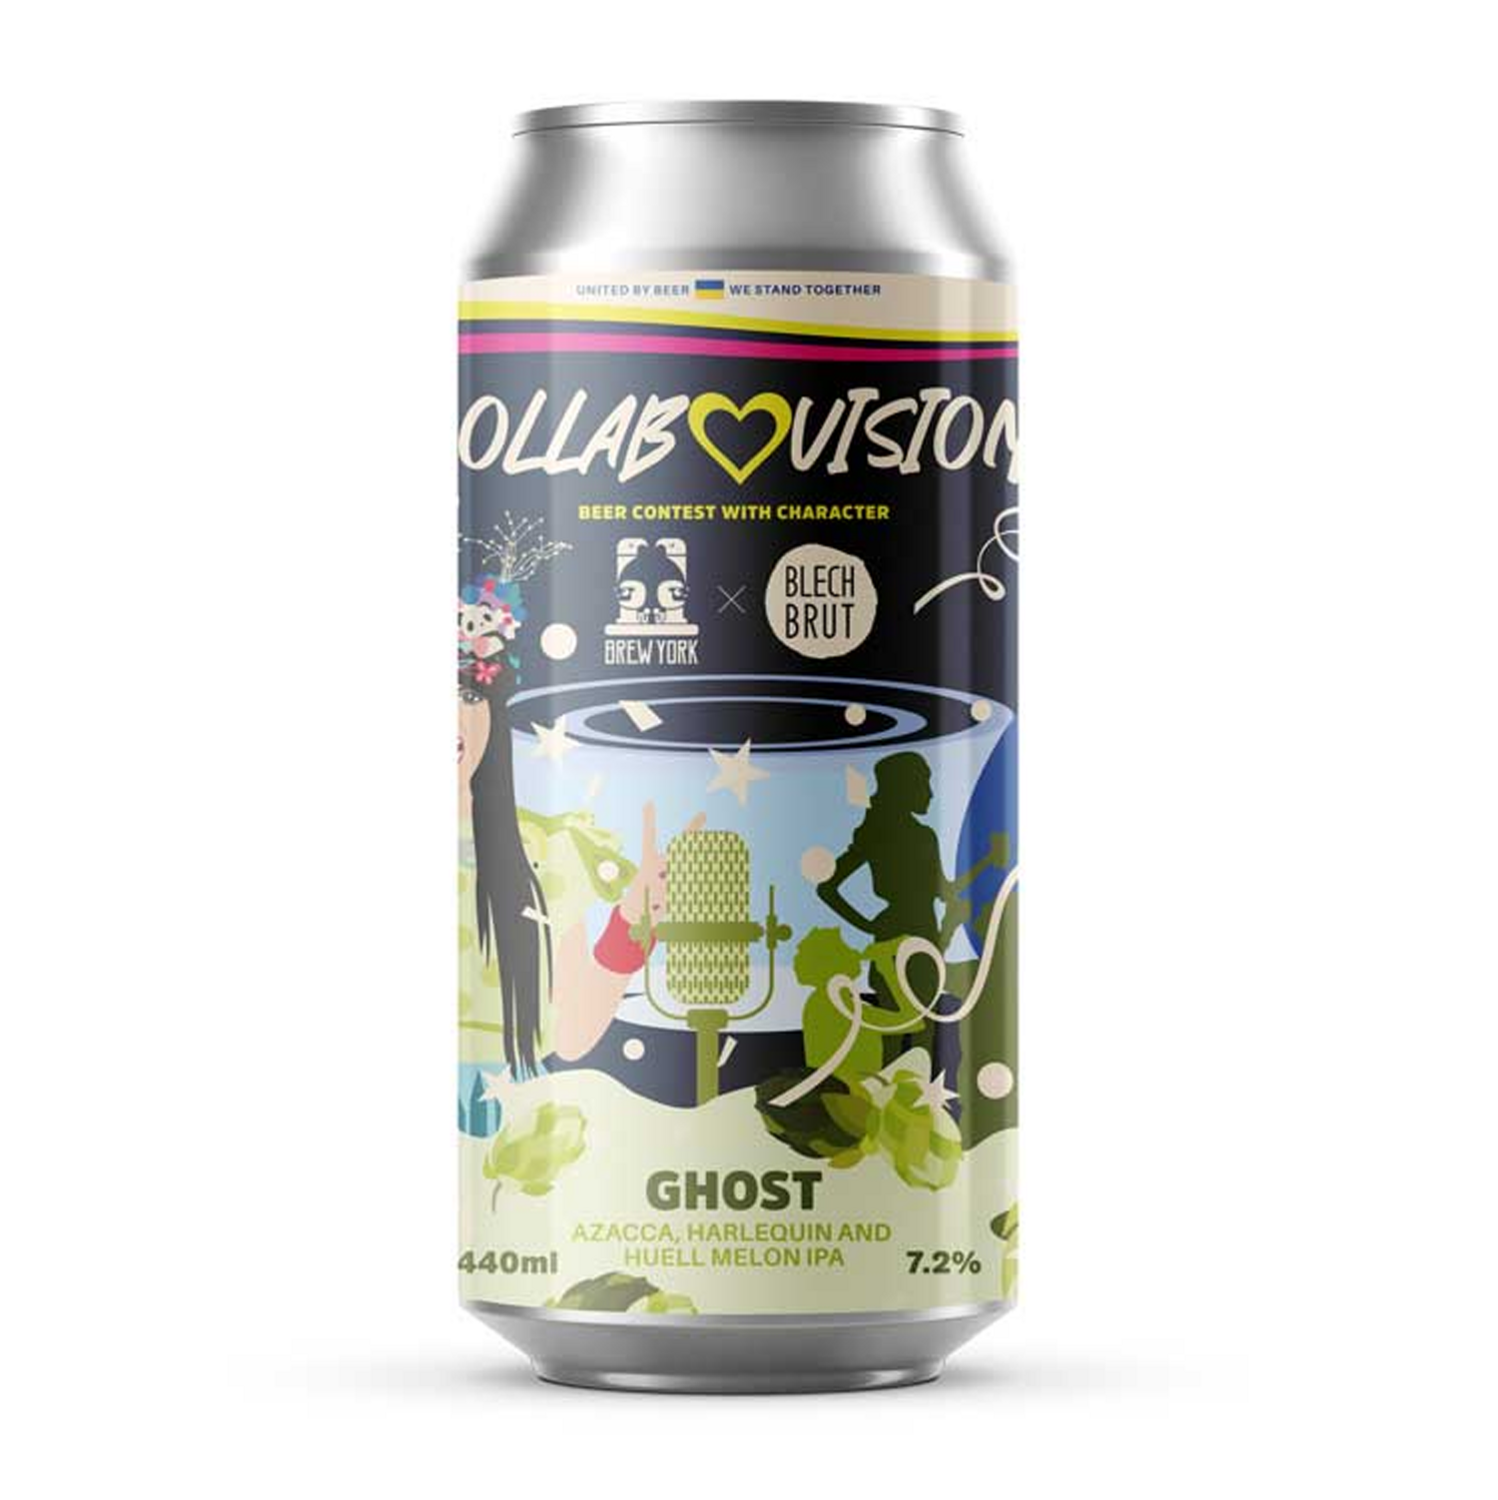 Brew York x Blech Brut Collabovision Ghost IPA